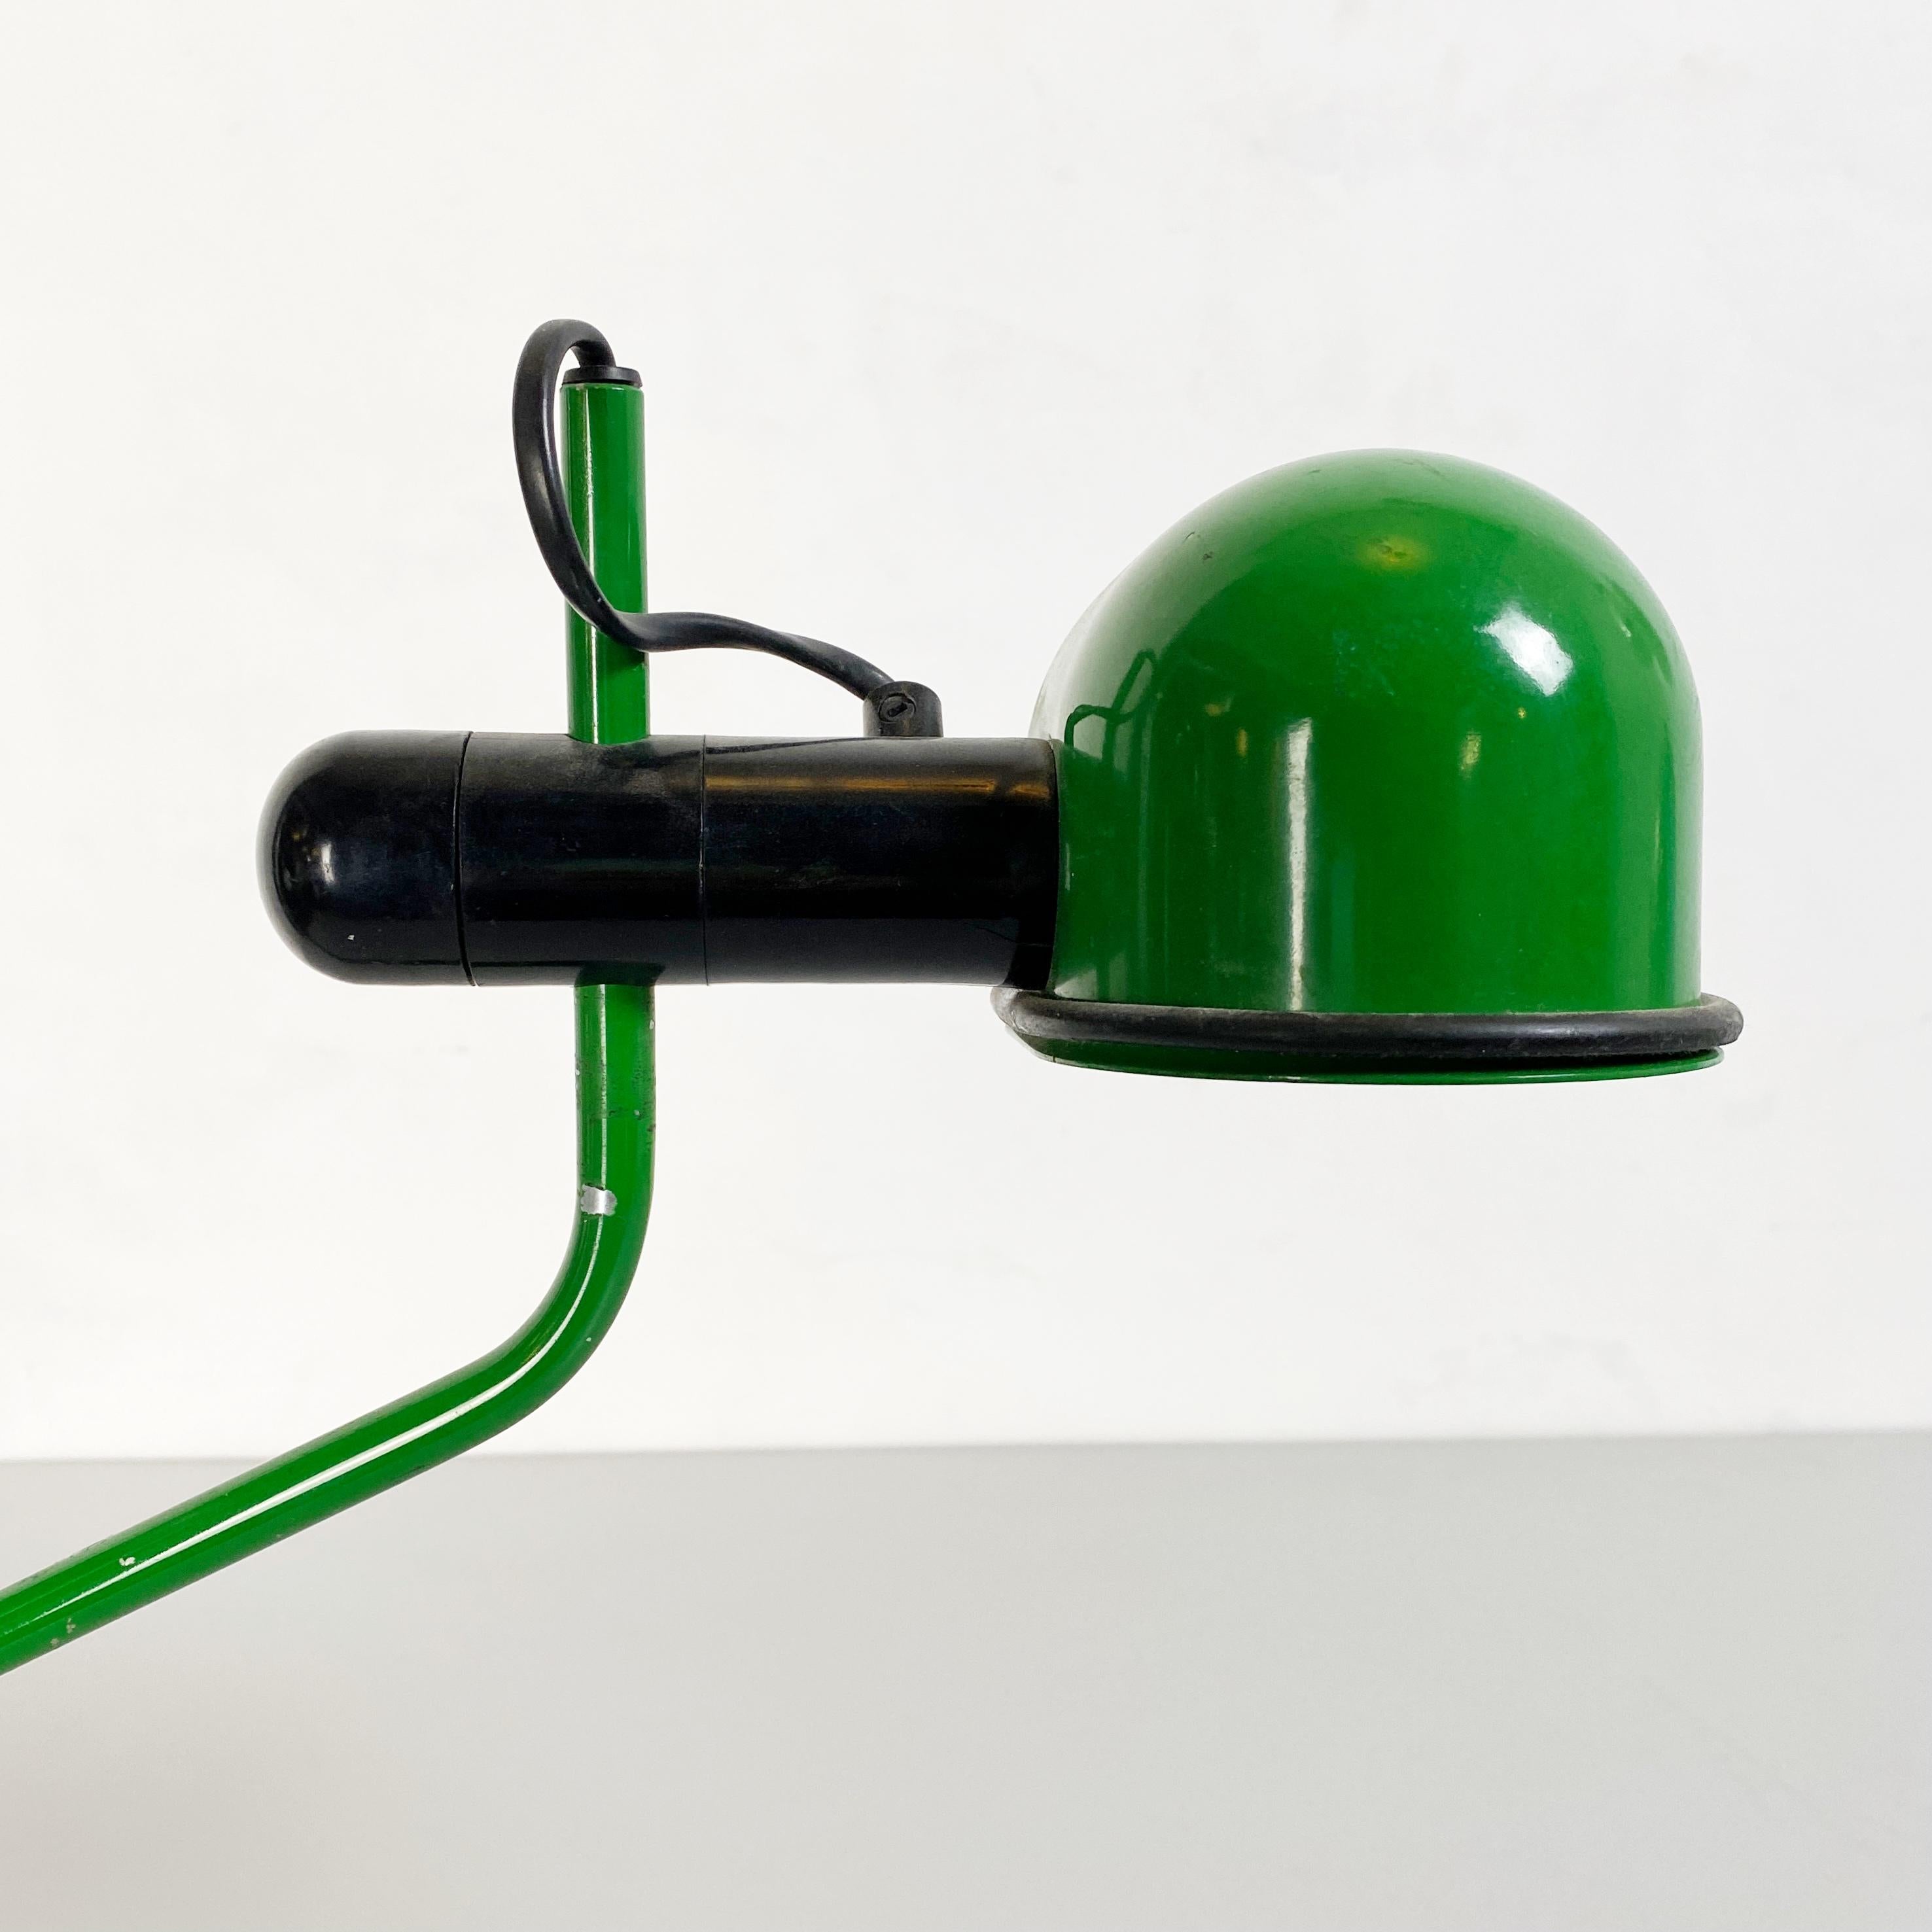 Italian Mid-Century Modern Green Metal Clamp-On Table Lamp, 1980s For Sale 2